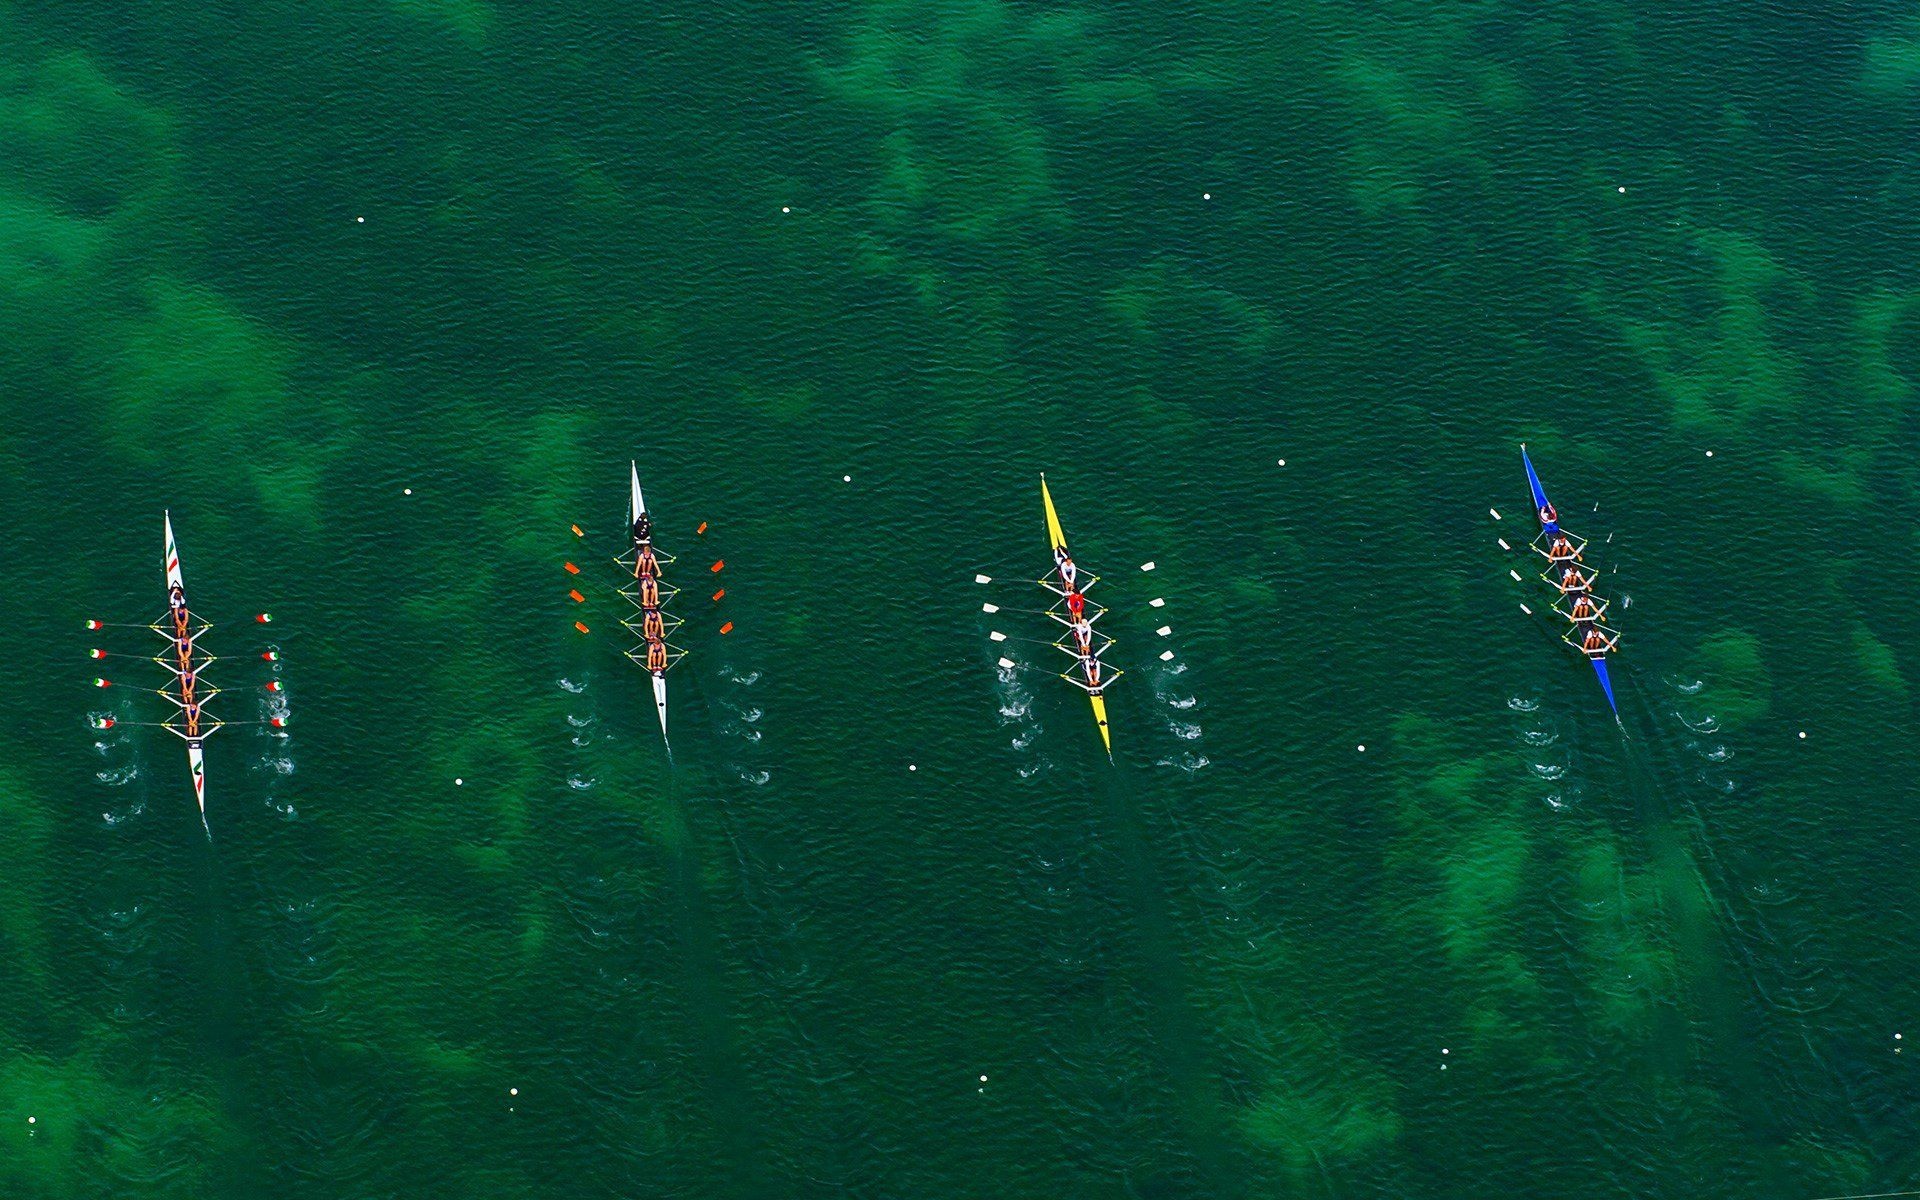 Rowing: 4 teams compete at the sculling event in the open water, International boating. 1920x1200 HD Wallpaper.